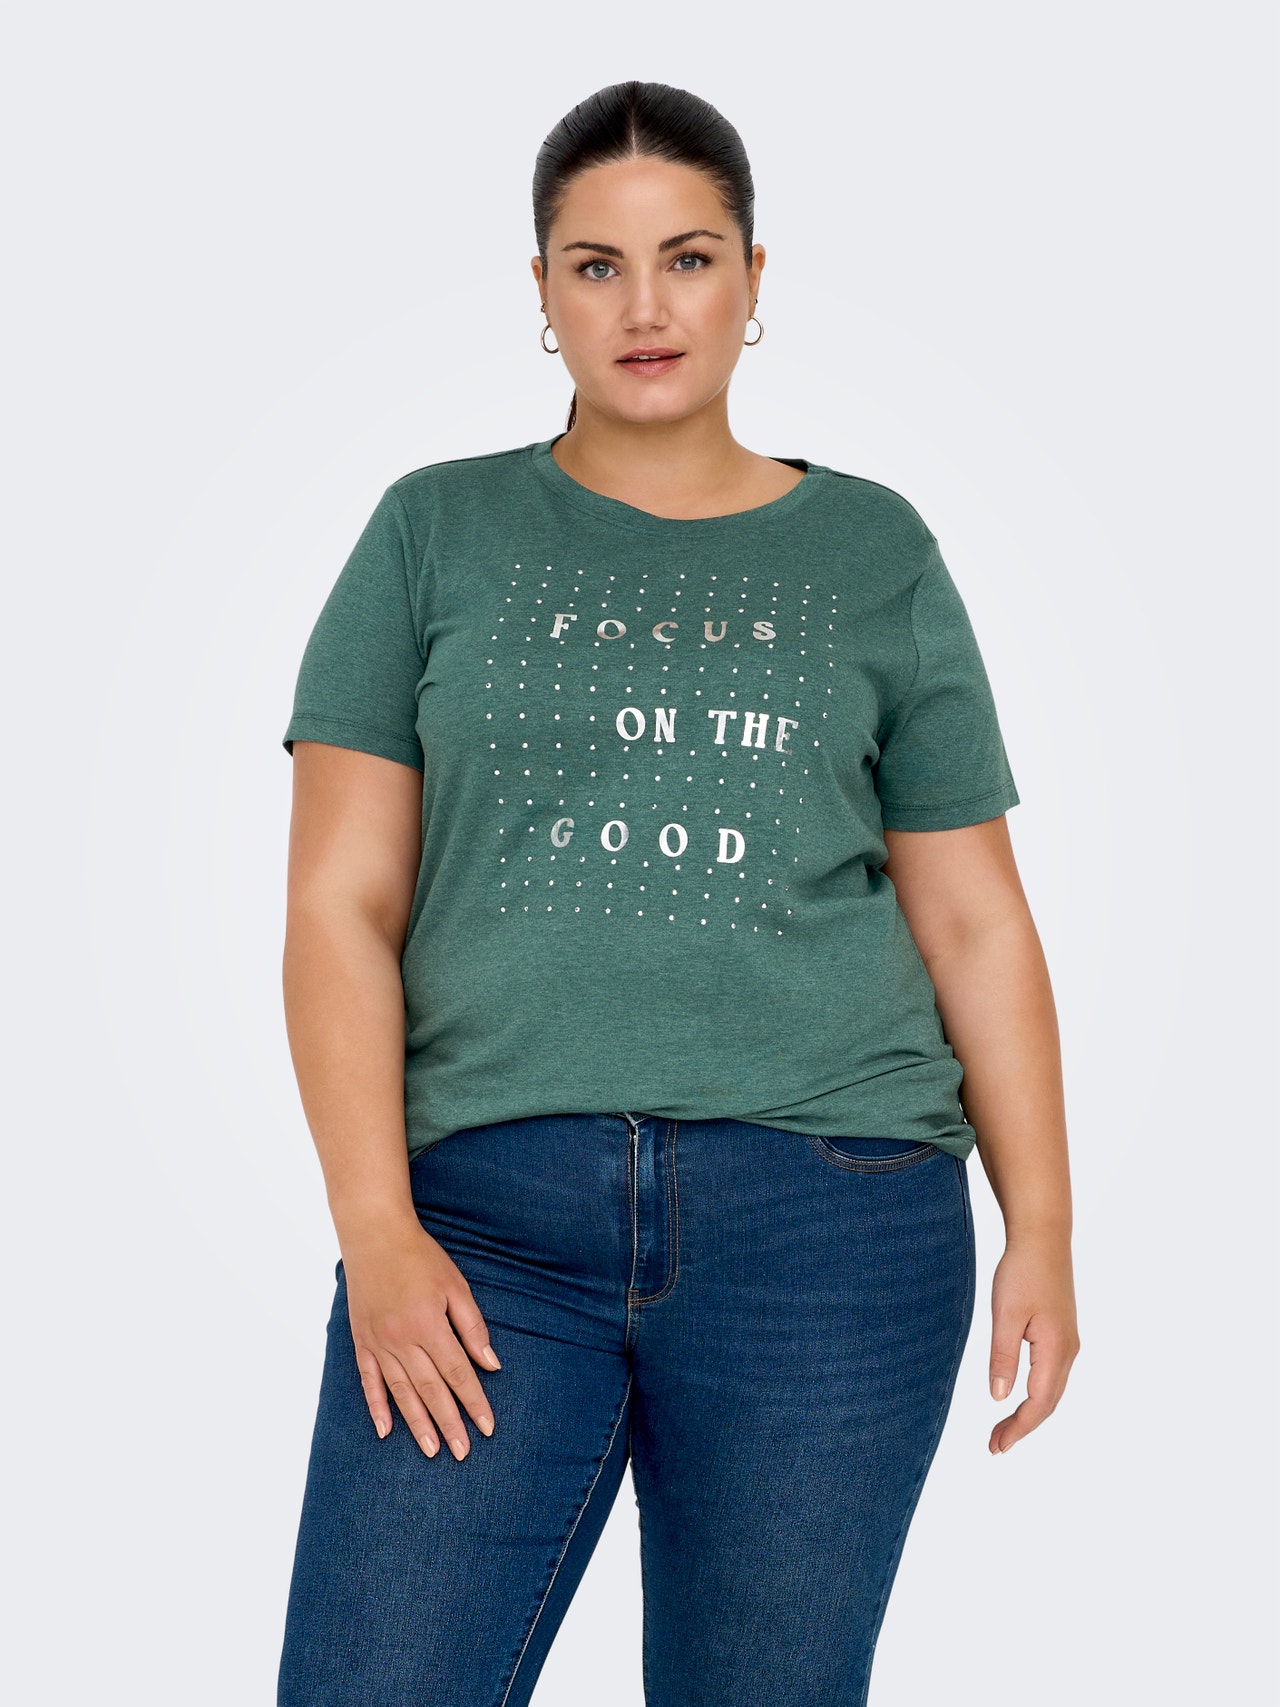 ONLY curvy o-neck t-shirt -Bayberry - 15304005